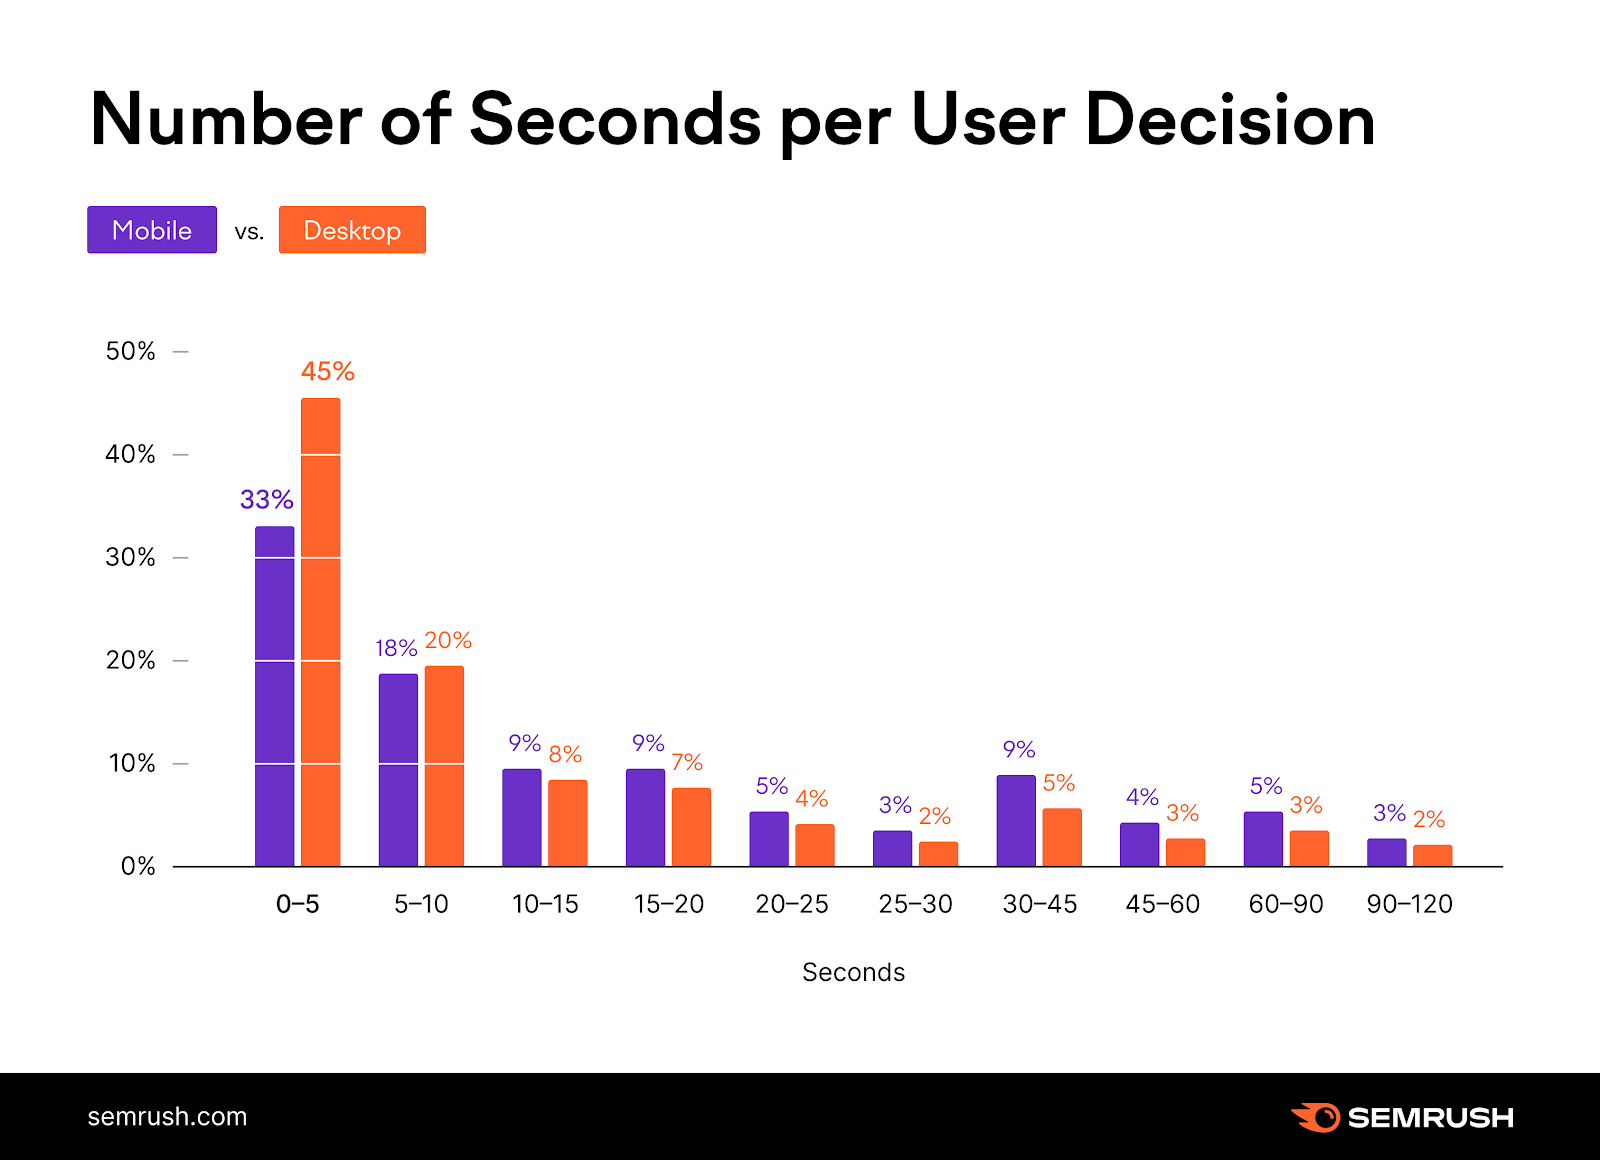 Google search statistics: Bar graph showing number of seconds per user decision on desktop and mobile 